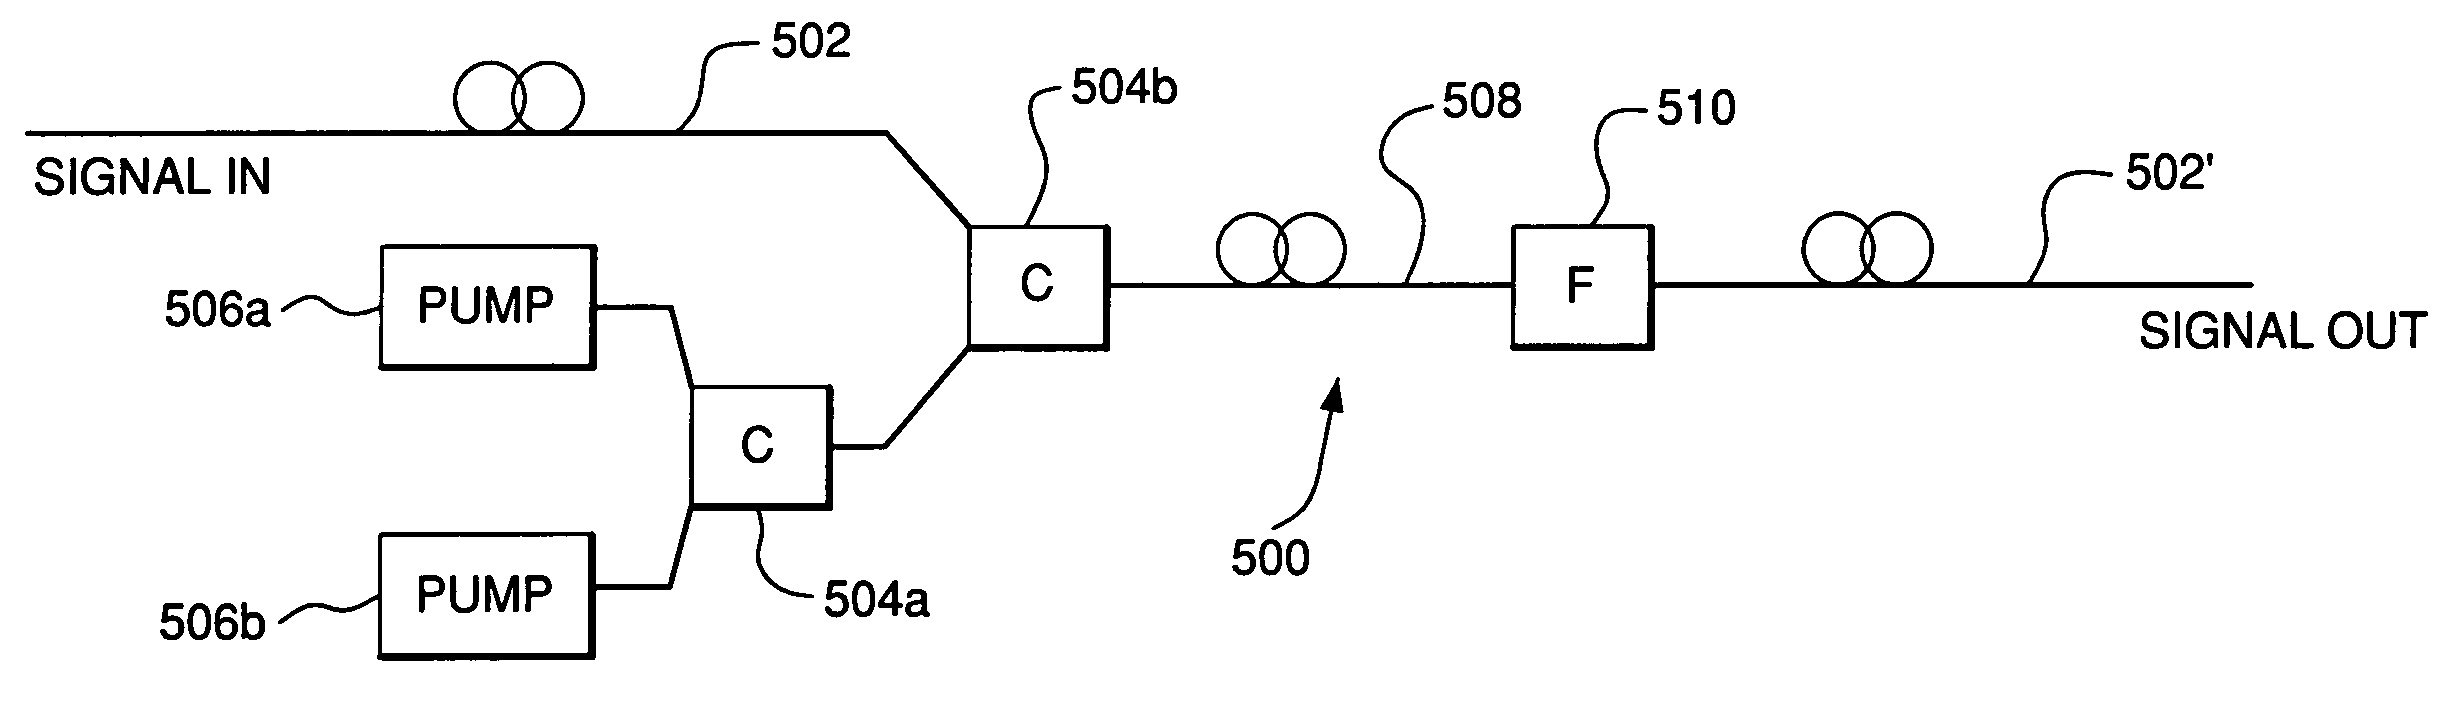 Phase-sensitive amplification in a fiber